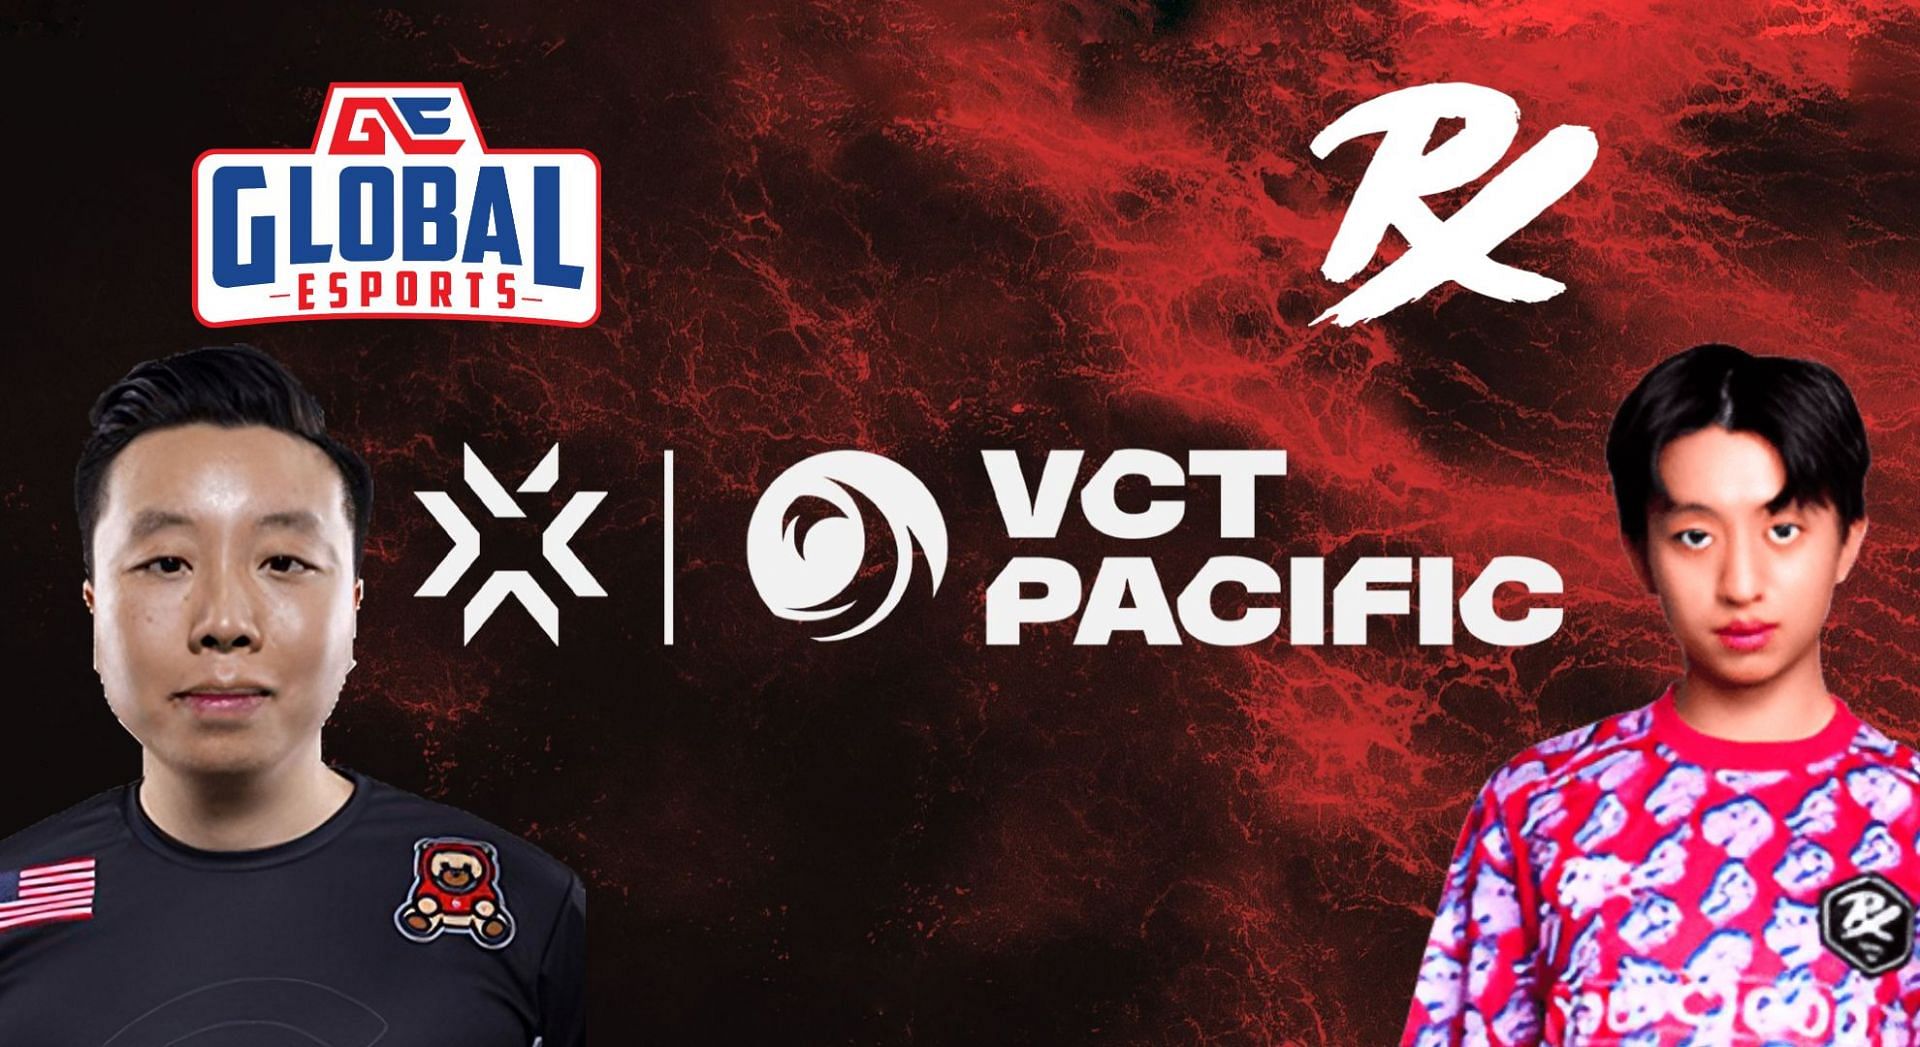 Paper Rex vs Global Esports - VCT Pacific League: Predictions, where to watch, and more(image via Sportskeeda)